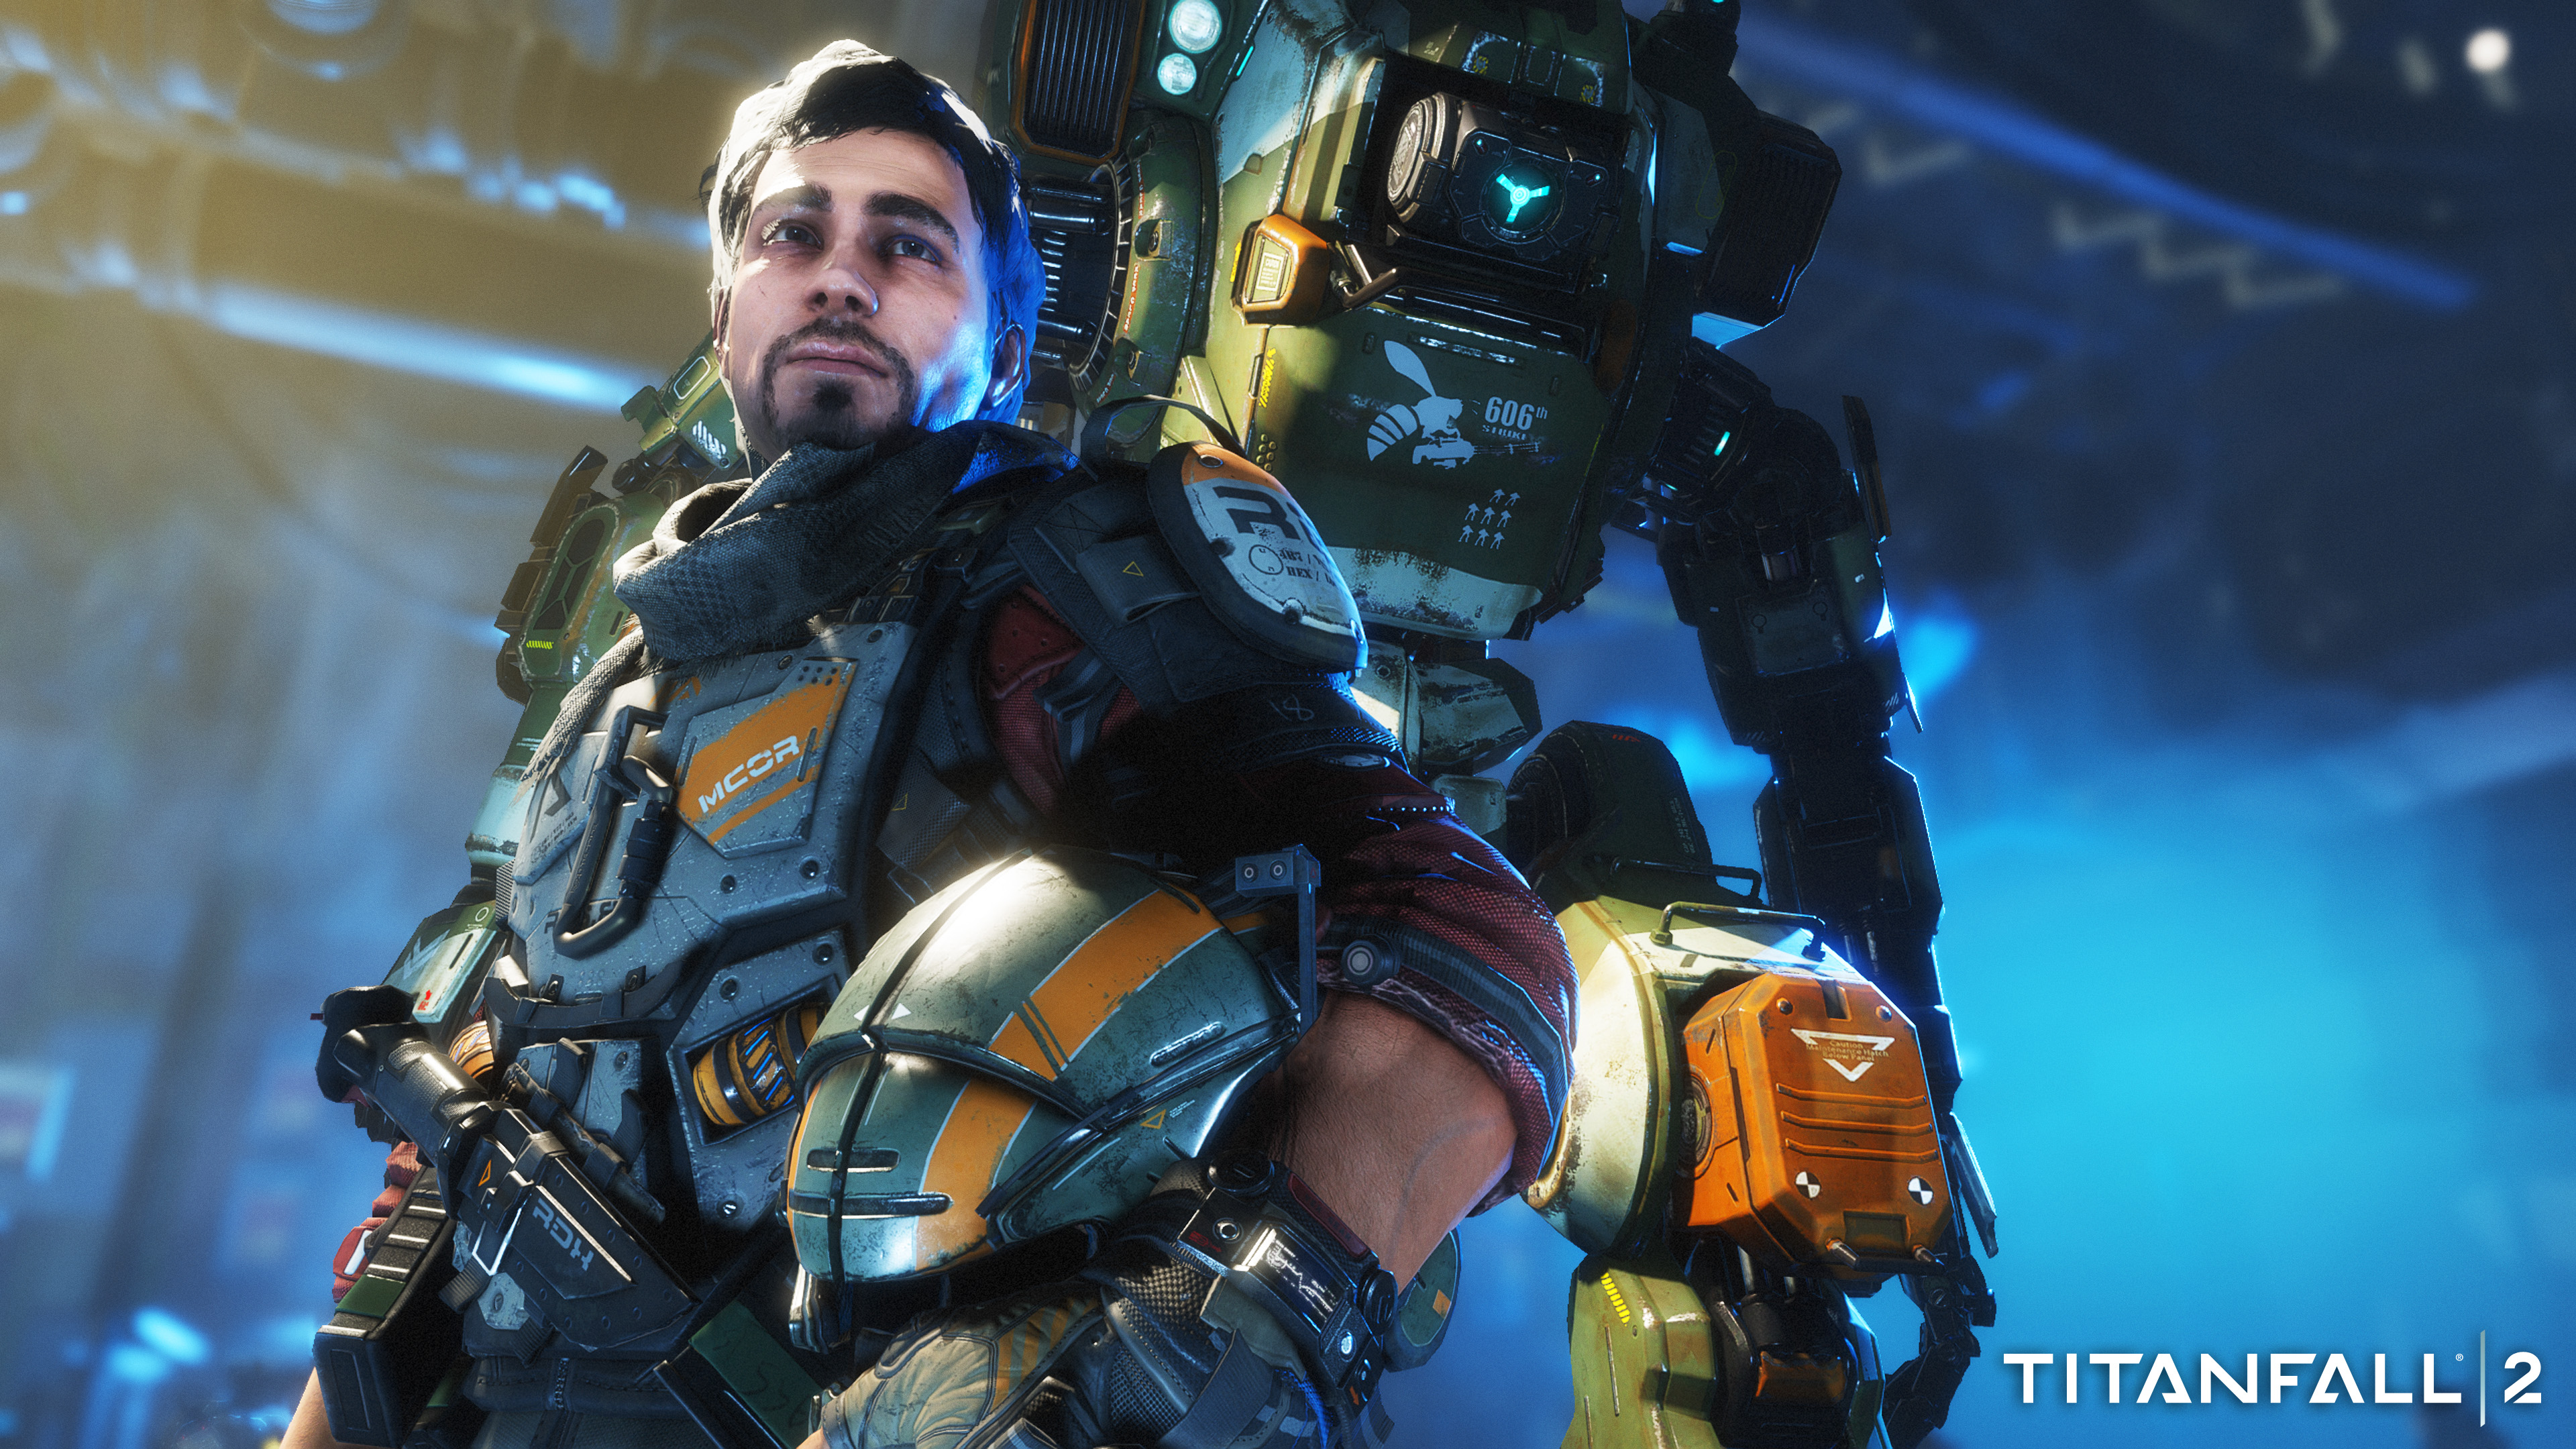 You Can And Should Play Titanfall 2 For Free Right Now - GameSpot